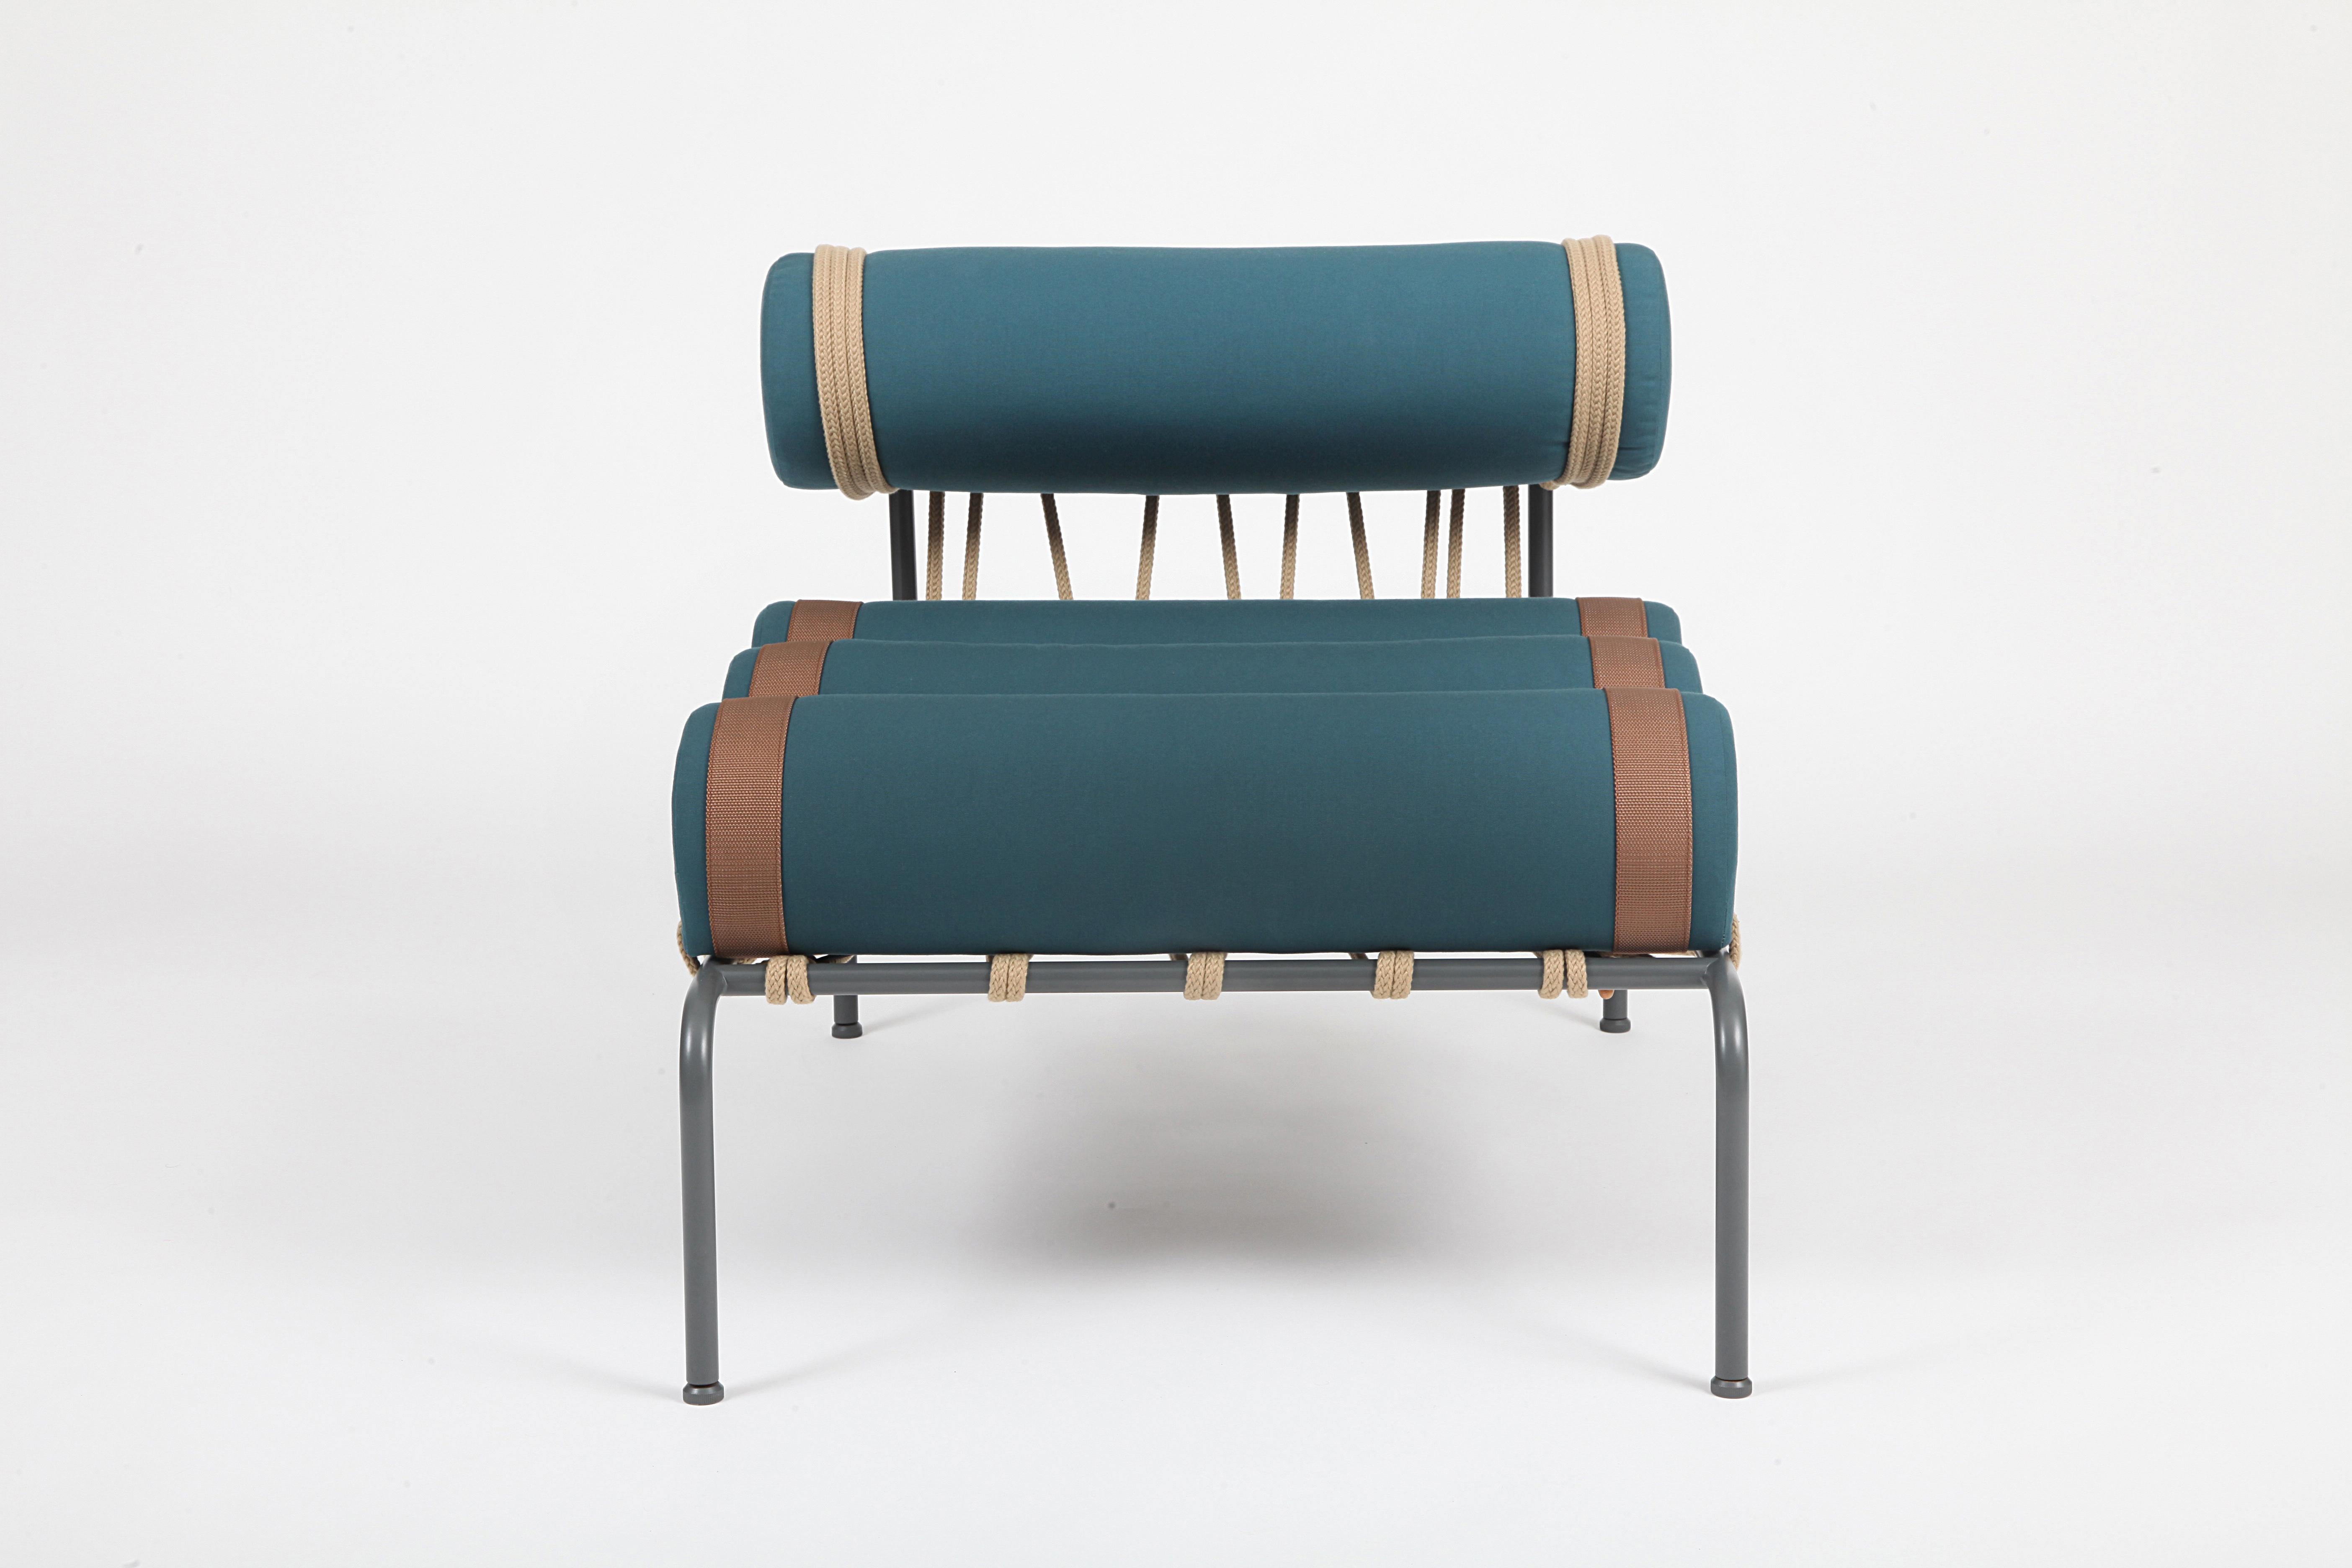 The Kylíndo armchair is an outdoor seat with reimagined proportions. Born from an extrusion of cylinders, a geometric figure derived from the complete rotation of a rectangle around one of its sides. The low seat is designed to create a cosy and